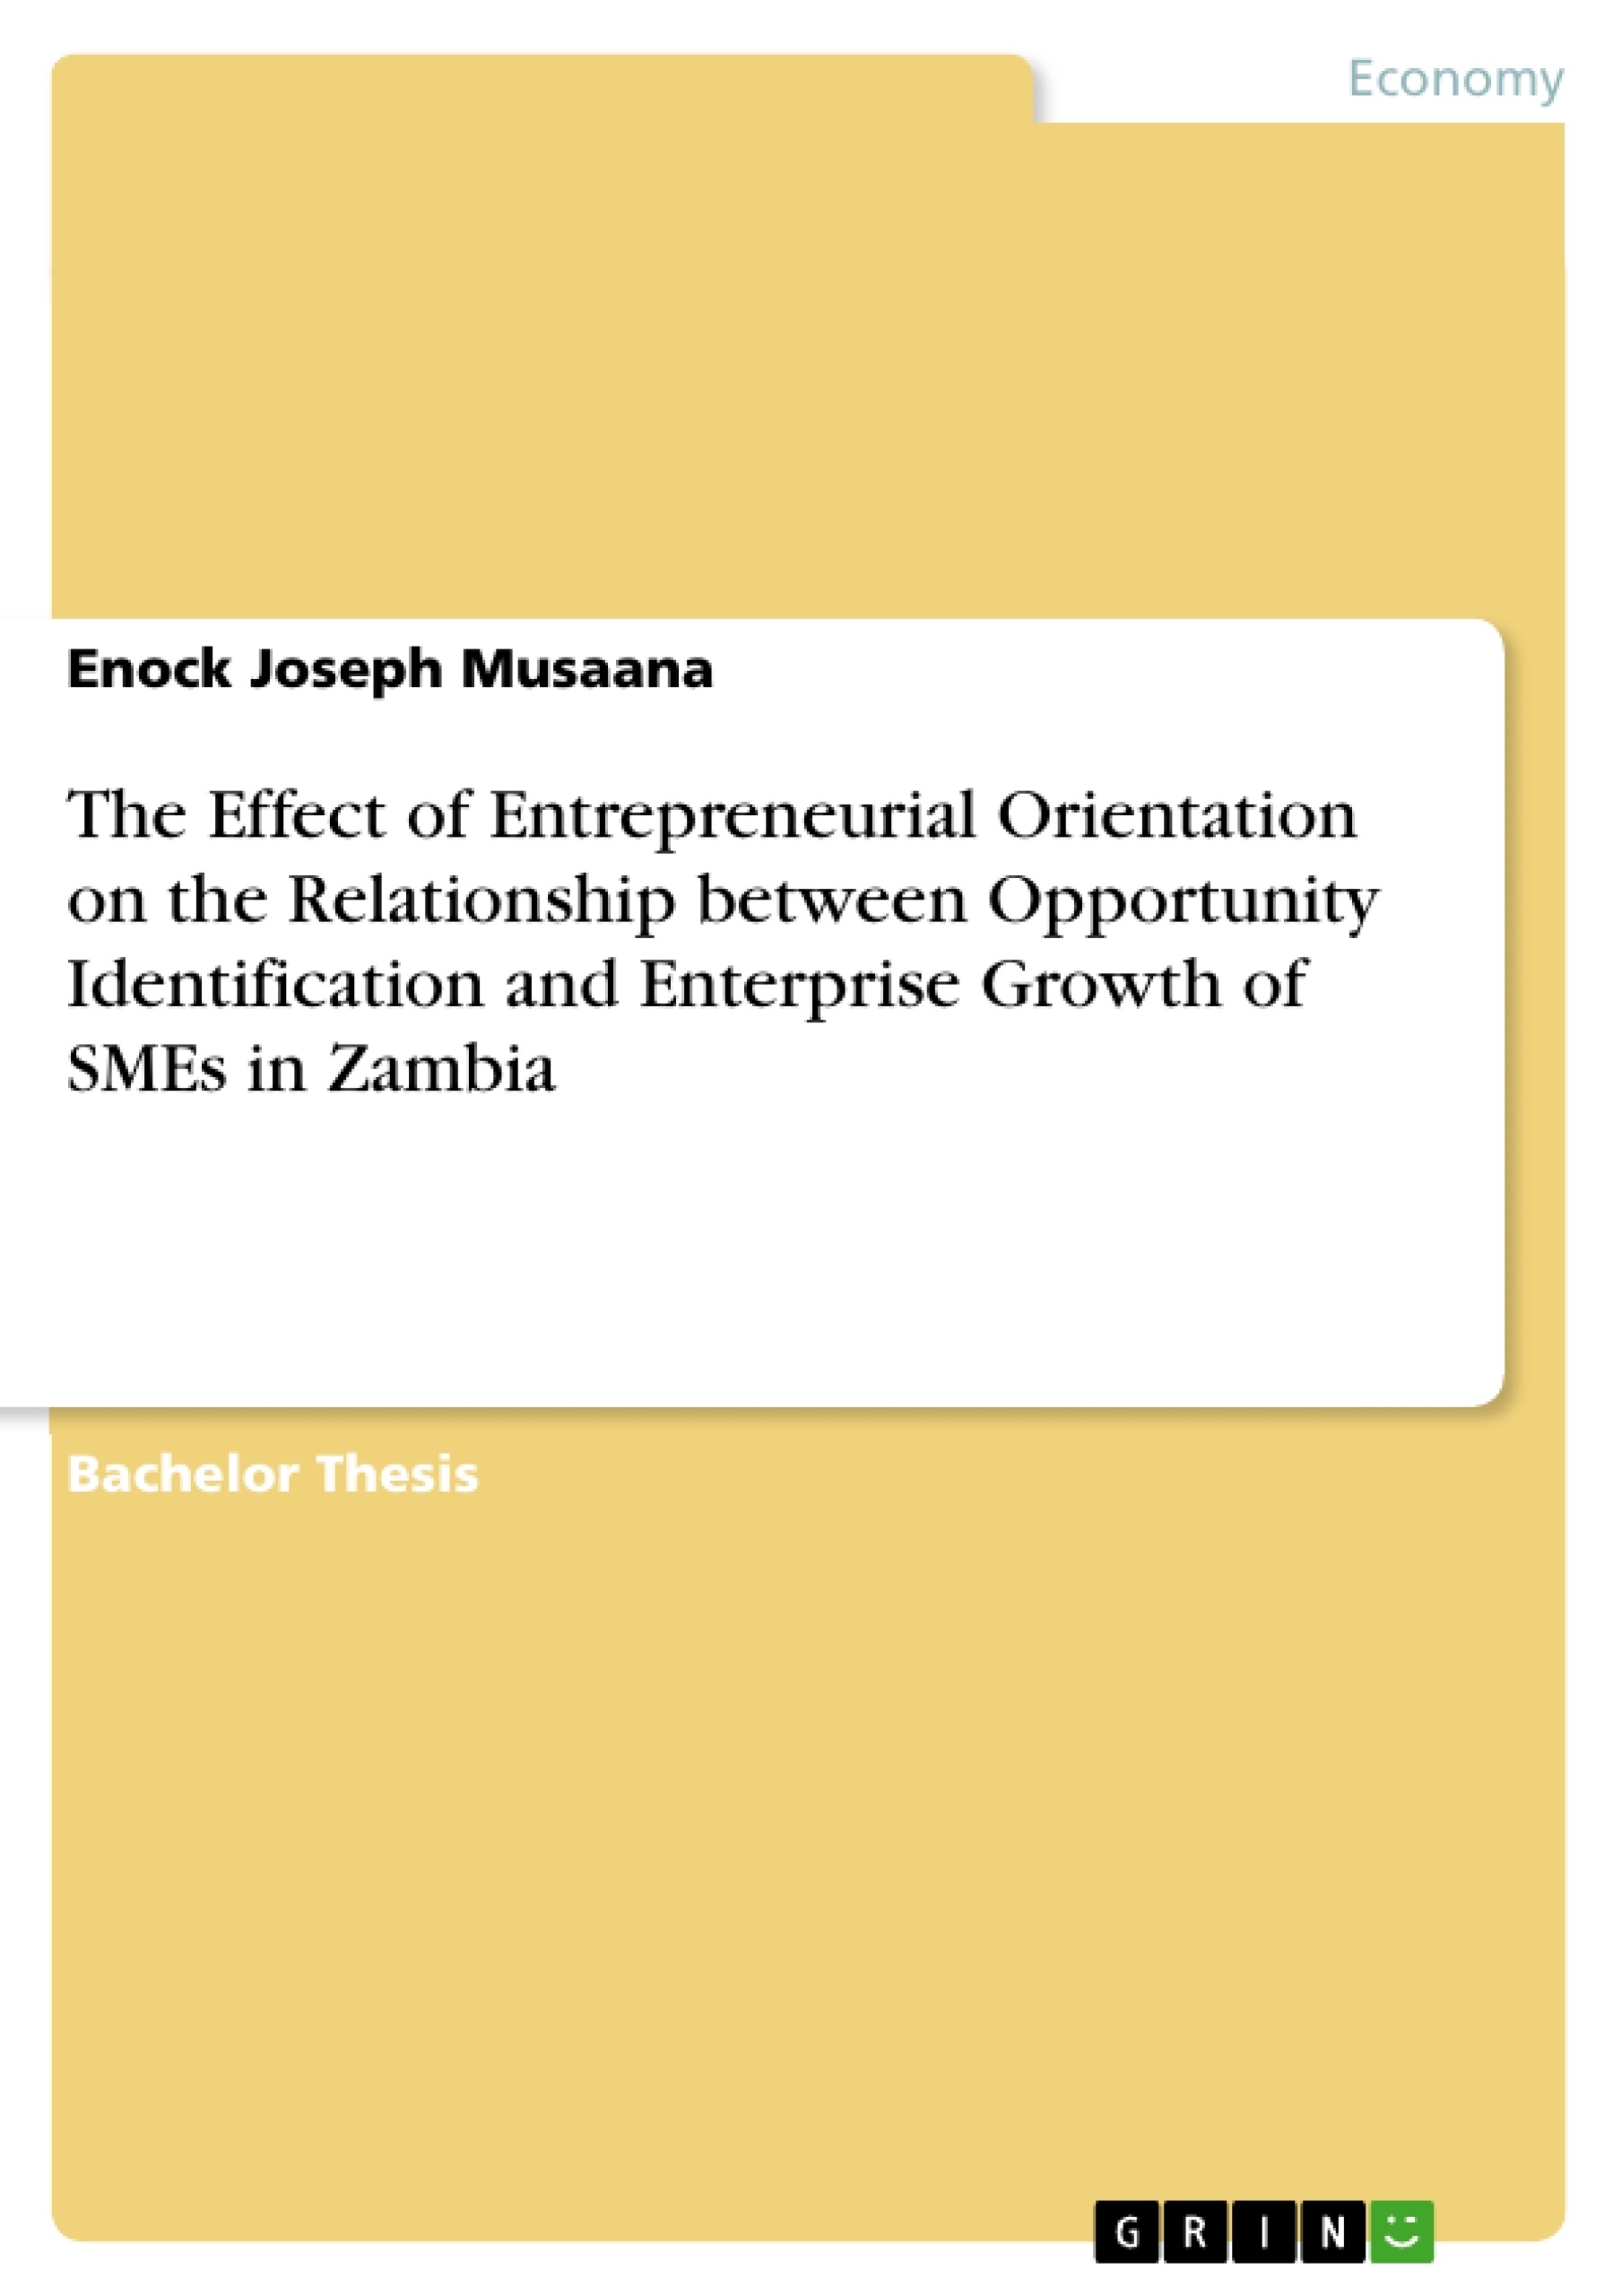 Titre: The Effect of Entrepreneurial Orientation on the Relationship between Opportunity Identification and Enterprise Growth of SMEs in Zambia